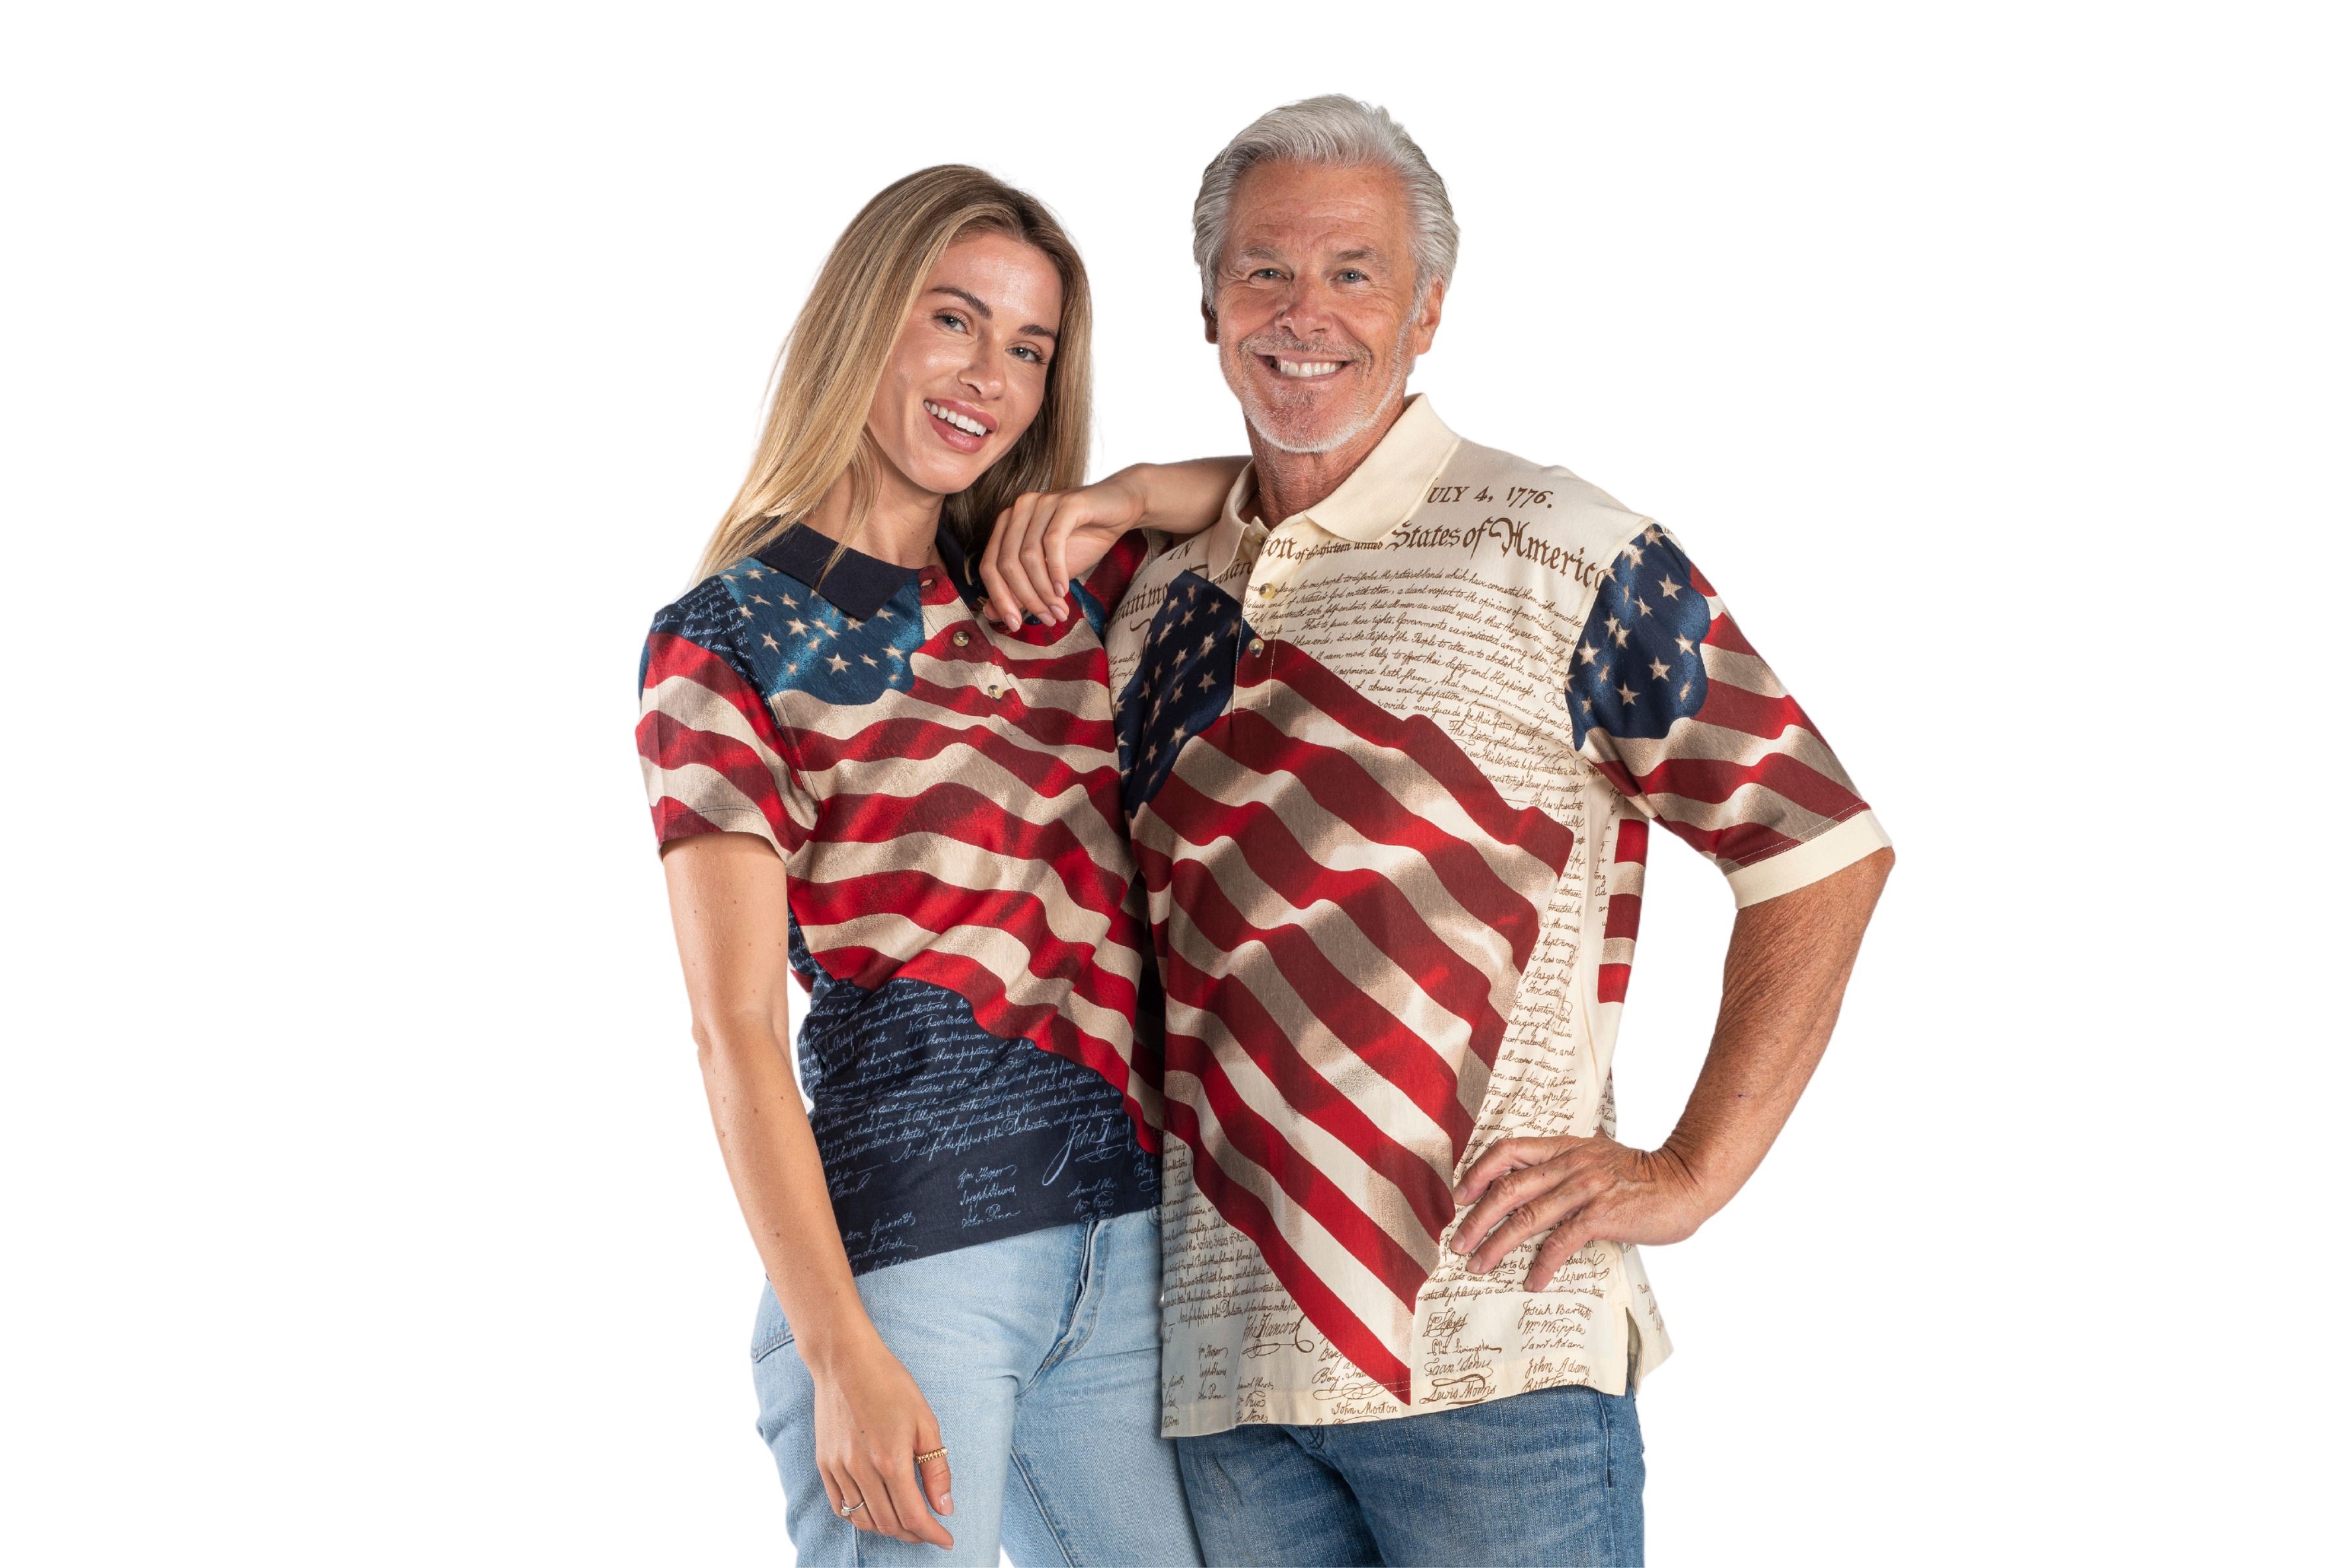 Two people wearing shirts depicting the American flag